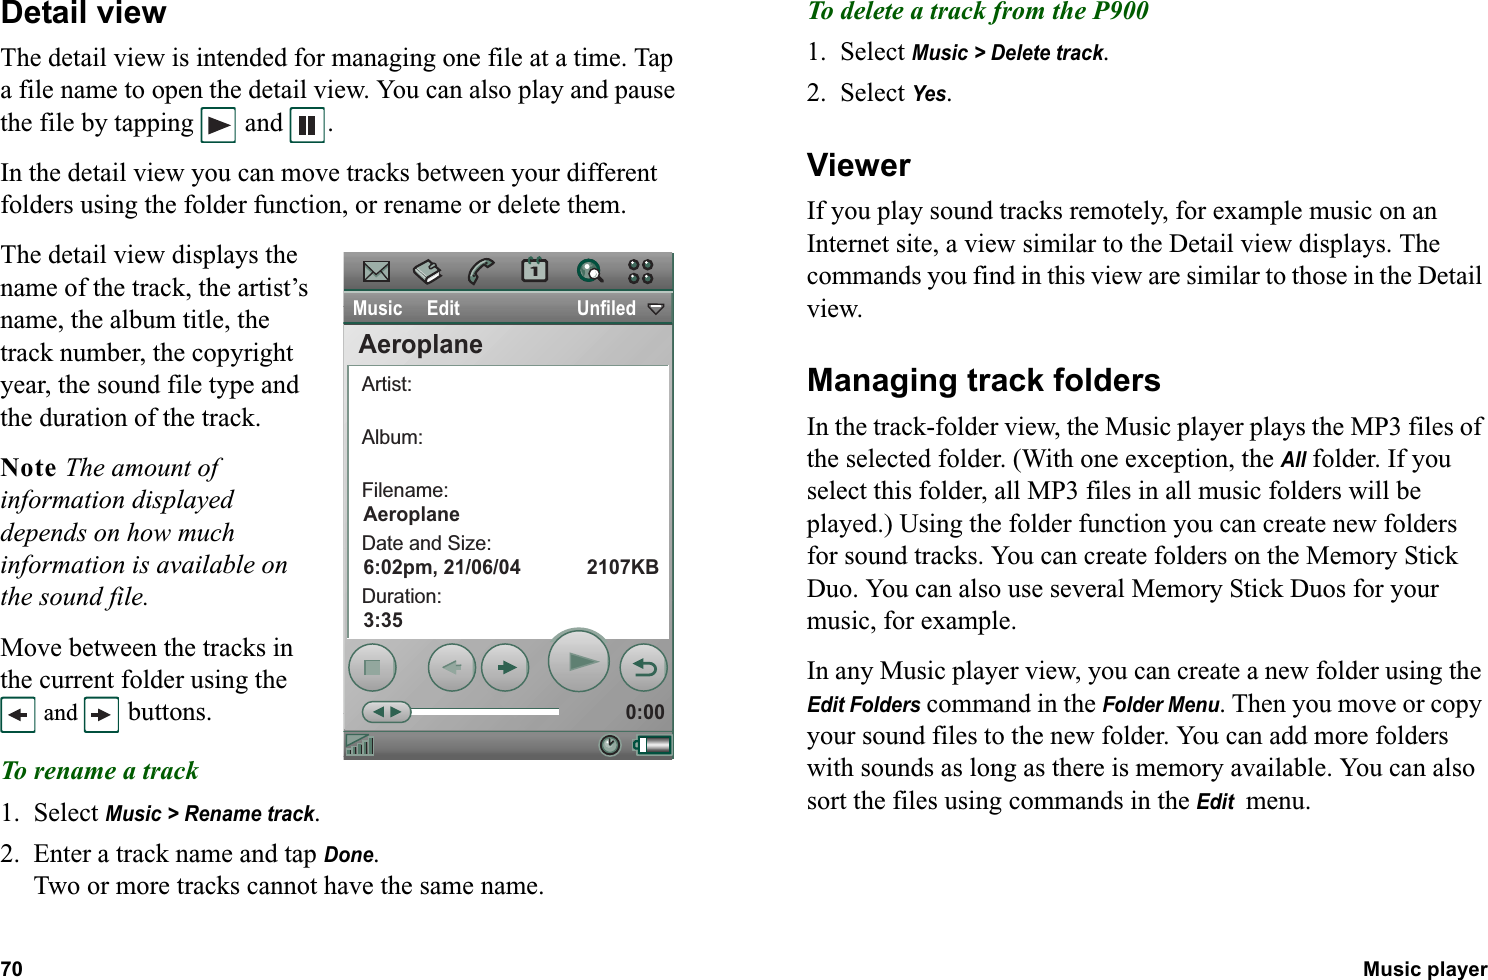 70 Music player  Detail viewThe detail view is intended for managing one file at a time. Tap a file name to open the detail view. You can also play and pause the file by tapping  and  .In the detail view you can move tracks between your different folders using the folder function, or rename or delete them.The detail view displays the name of the track, the artist’s name, the album title, the track number, the copyright year, the sound file type and the duration of the track.Note The amount of information displayed depends on how much information is available on the sound file.Move between the tracks in the current folder using the  and   buttons.To rename a track1. Select Music &gt; Rename track.2. Enter a track name and tap Done.Two or more tracks cannot have the same name.To delete a track from the P9001. Select Music &gt; Delete track.2. Select Yes.ViewerIf you play sound tracks remotely, for example music on an Internet site, a view similar to the Detail view displays. The commands you find in this view are similar to those in the Detail view.Managing track foldersIn the track-folder view, the Music player plays the MP3 files of the selected folder. (With one exception, the All folder. If you select this folder, all MP3 files in all music folders will be played.) Using the folder function you can create new folders for sound tracks. You can create folders on the Memory Stick Duo. You can also use several Memory Stick Duos for your music, for example.In any Music player view, you can create a new folder using the Edit Folders command in the Folder Menu. Then you move or copy your sound files to the new folder. You can add more folders with sounds as long as there is memory available. You can also sort the files using commands in the Edit  menu.Music     Edit                        UnfiledArtist:Album:Filename:Date and Size:Duration:0:00AeroplaneAeroplane6:02pm, 21/06/04            2107KB3:35